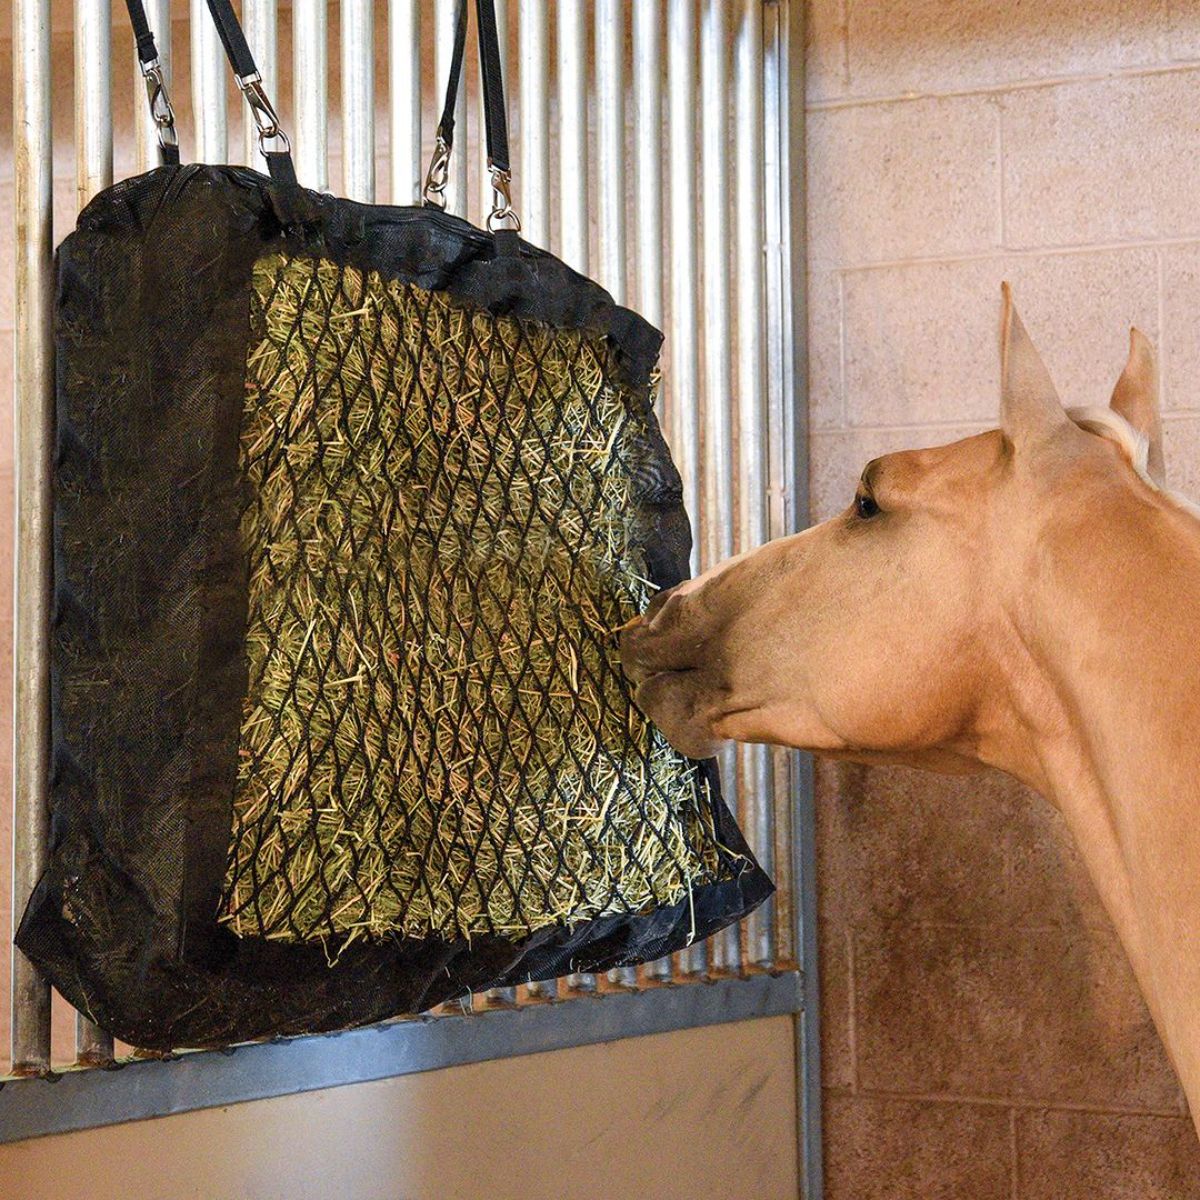 A brown horse grazes hay from a hanging feeder on a wall.